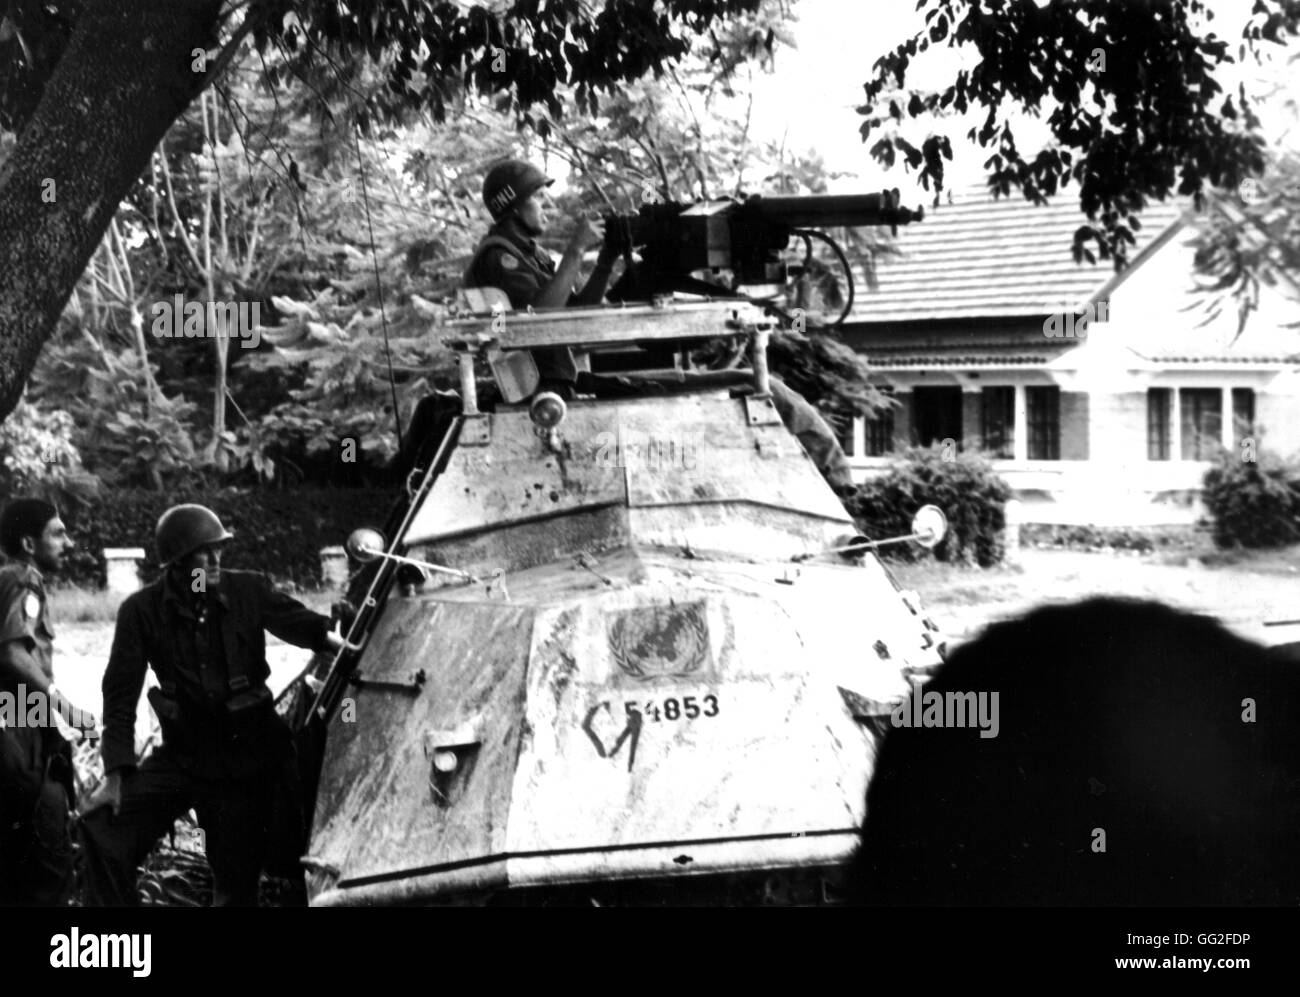 Katanga. U.N.O. forces in action in Elisabethville.  The crew of a damaged armored vehicule fights back with submachine guns. December 1961 Congo (Zaire) Stock Photo